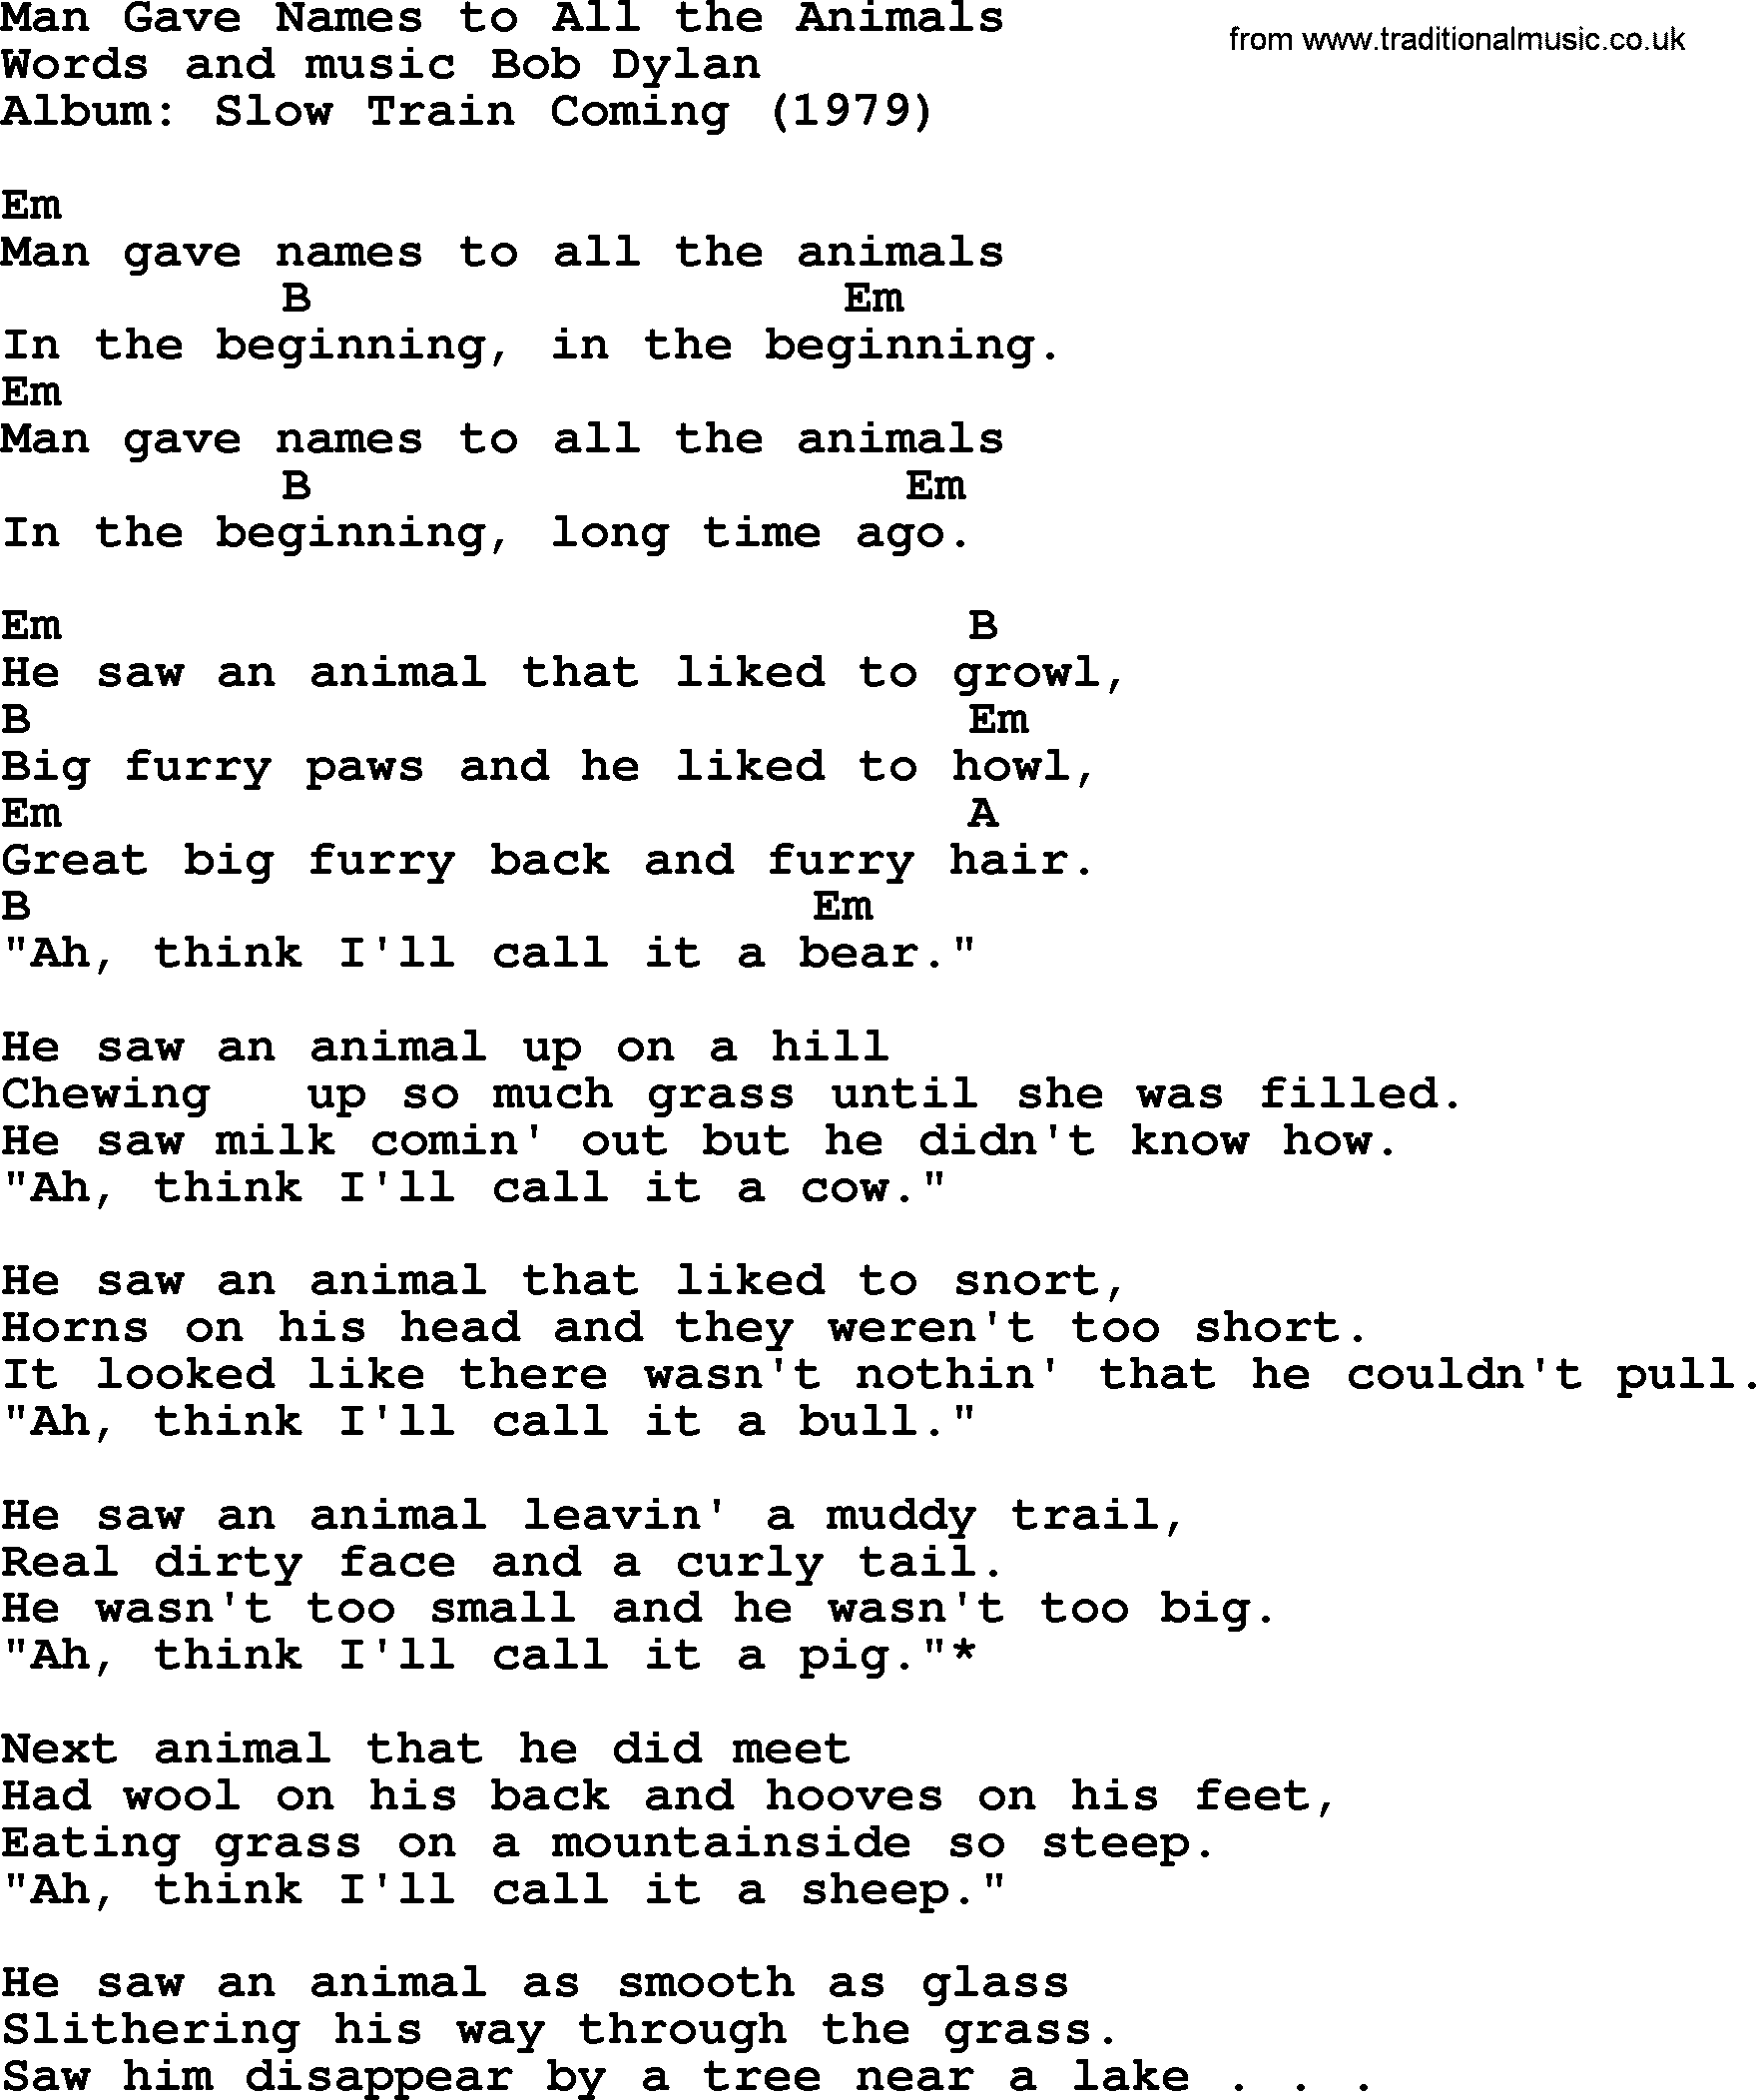 Bob Dylan song, lyrics with chords - Man Gave Names to All the Animals